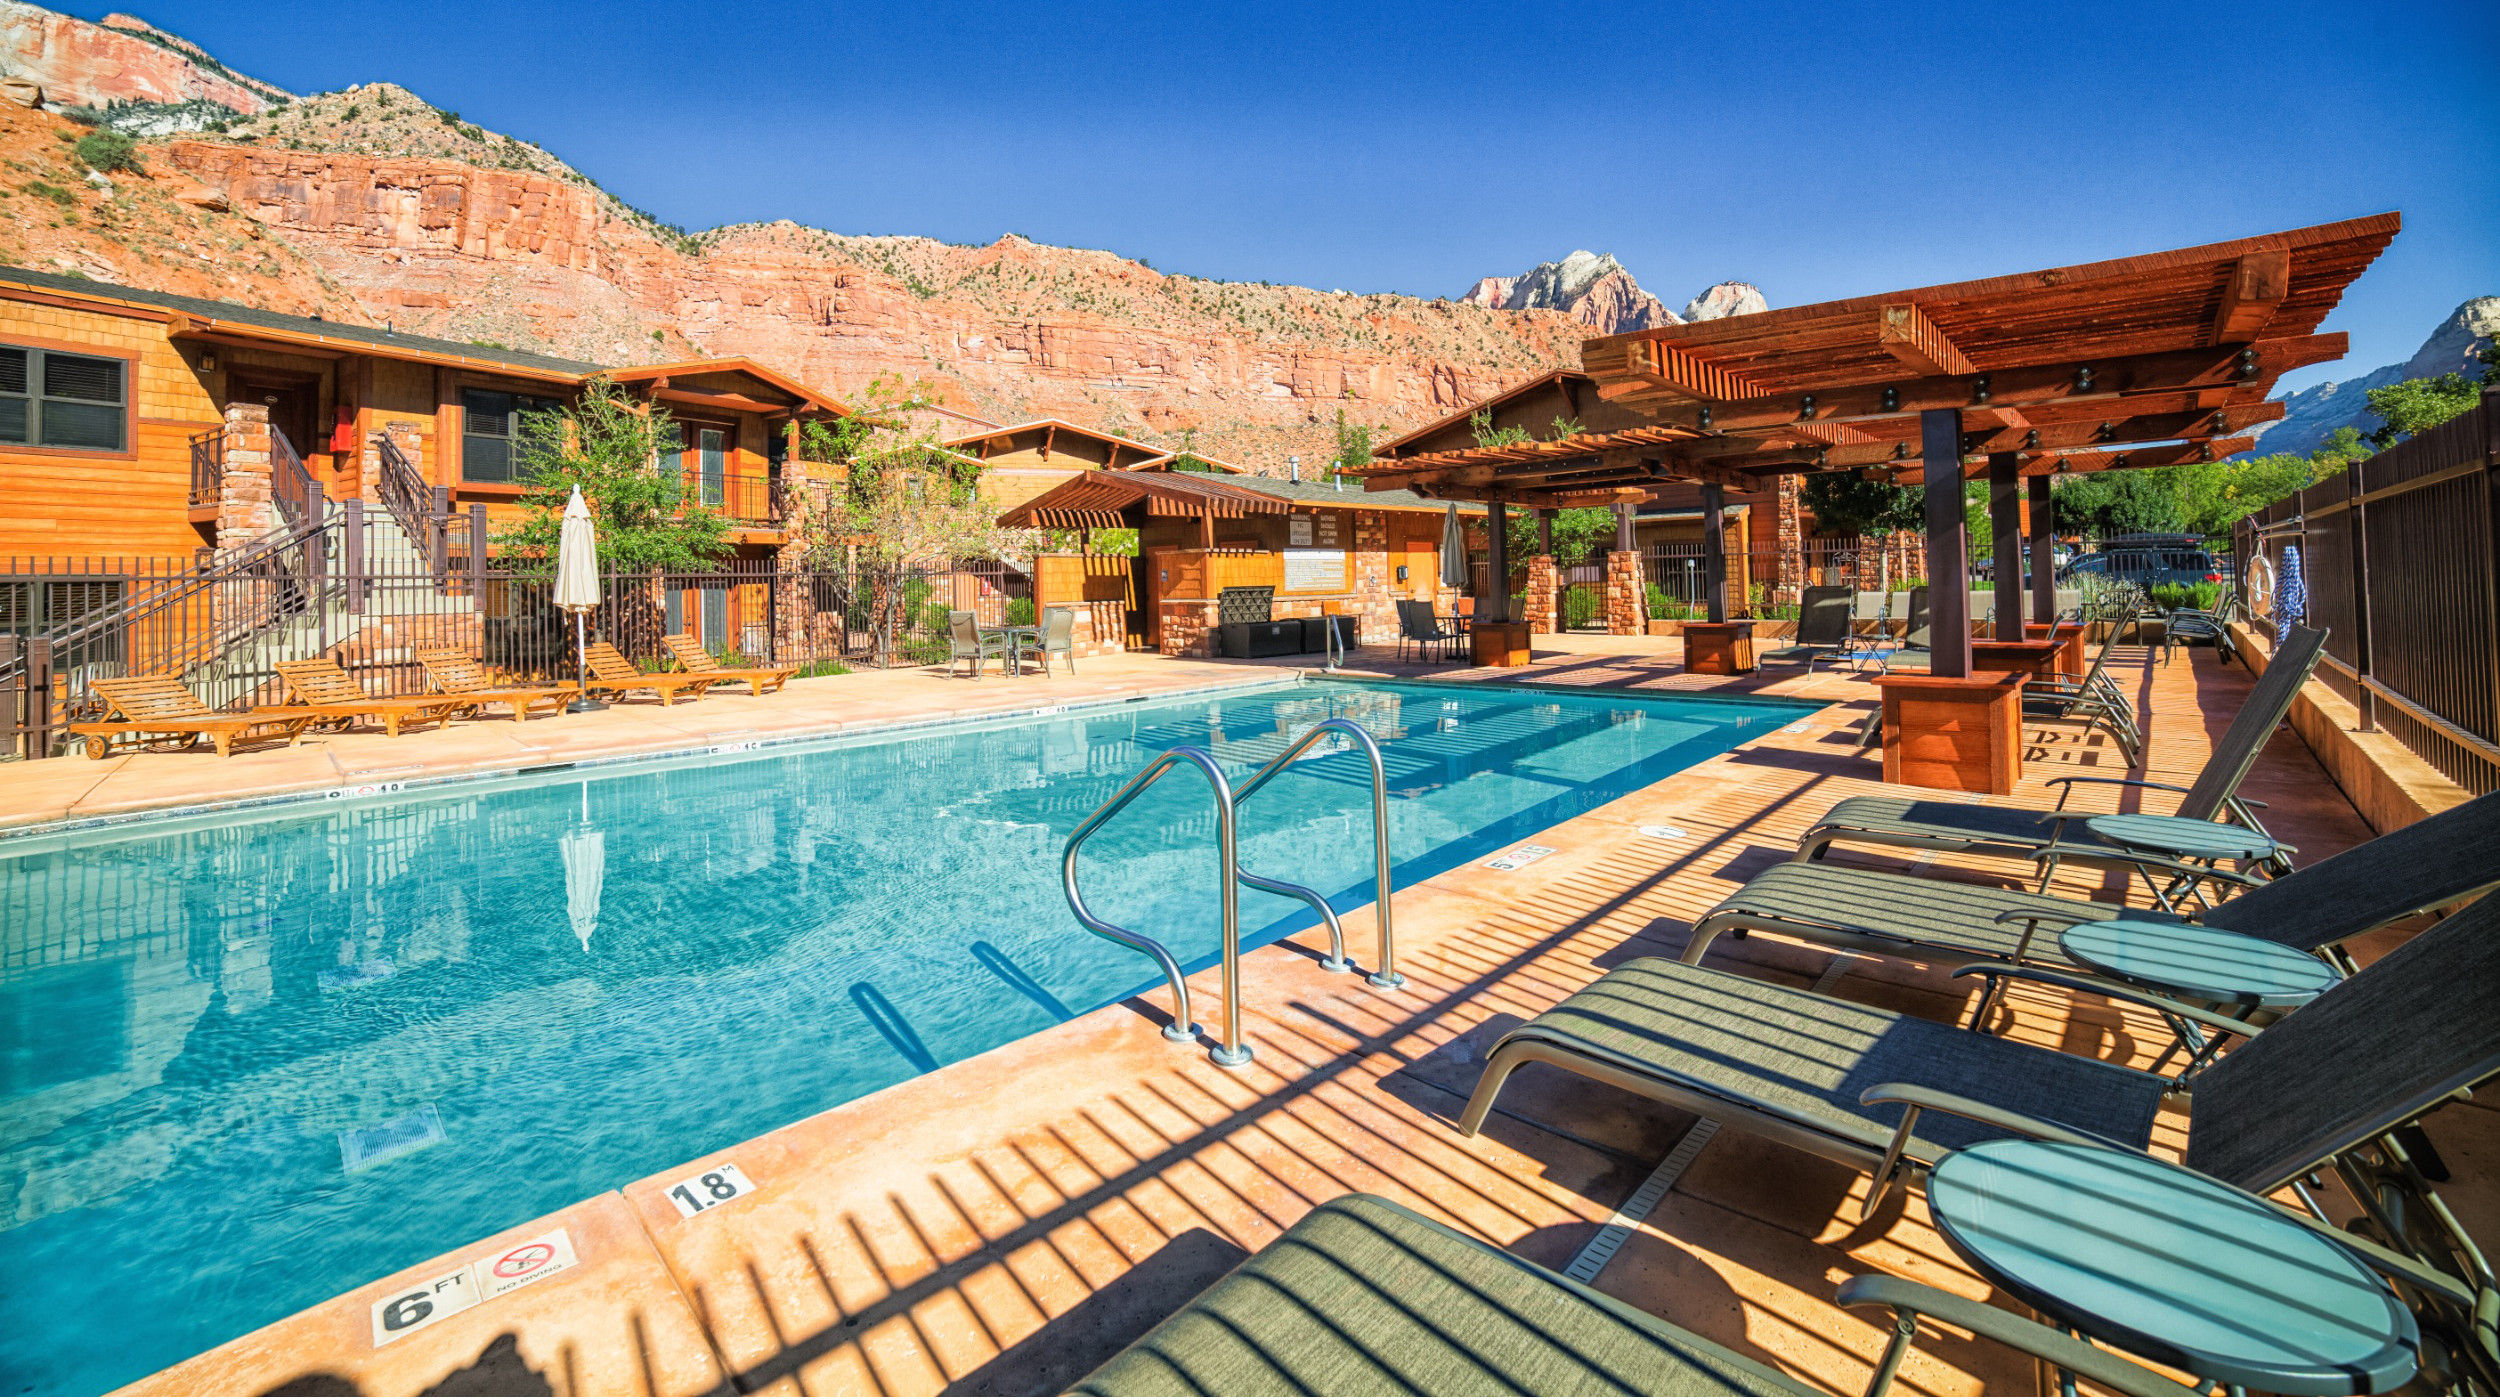 accommodation in zion national park service